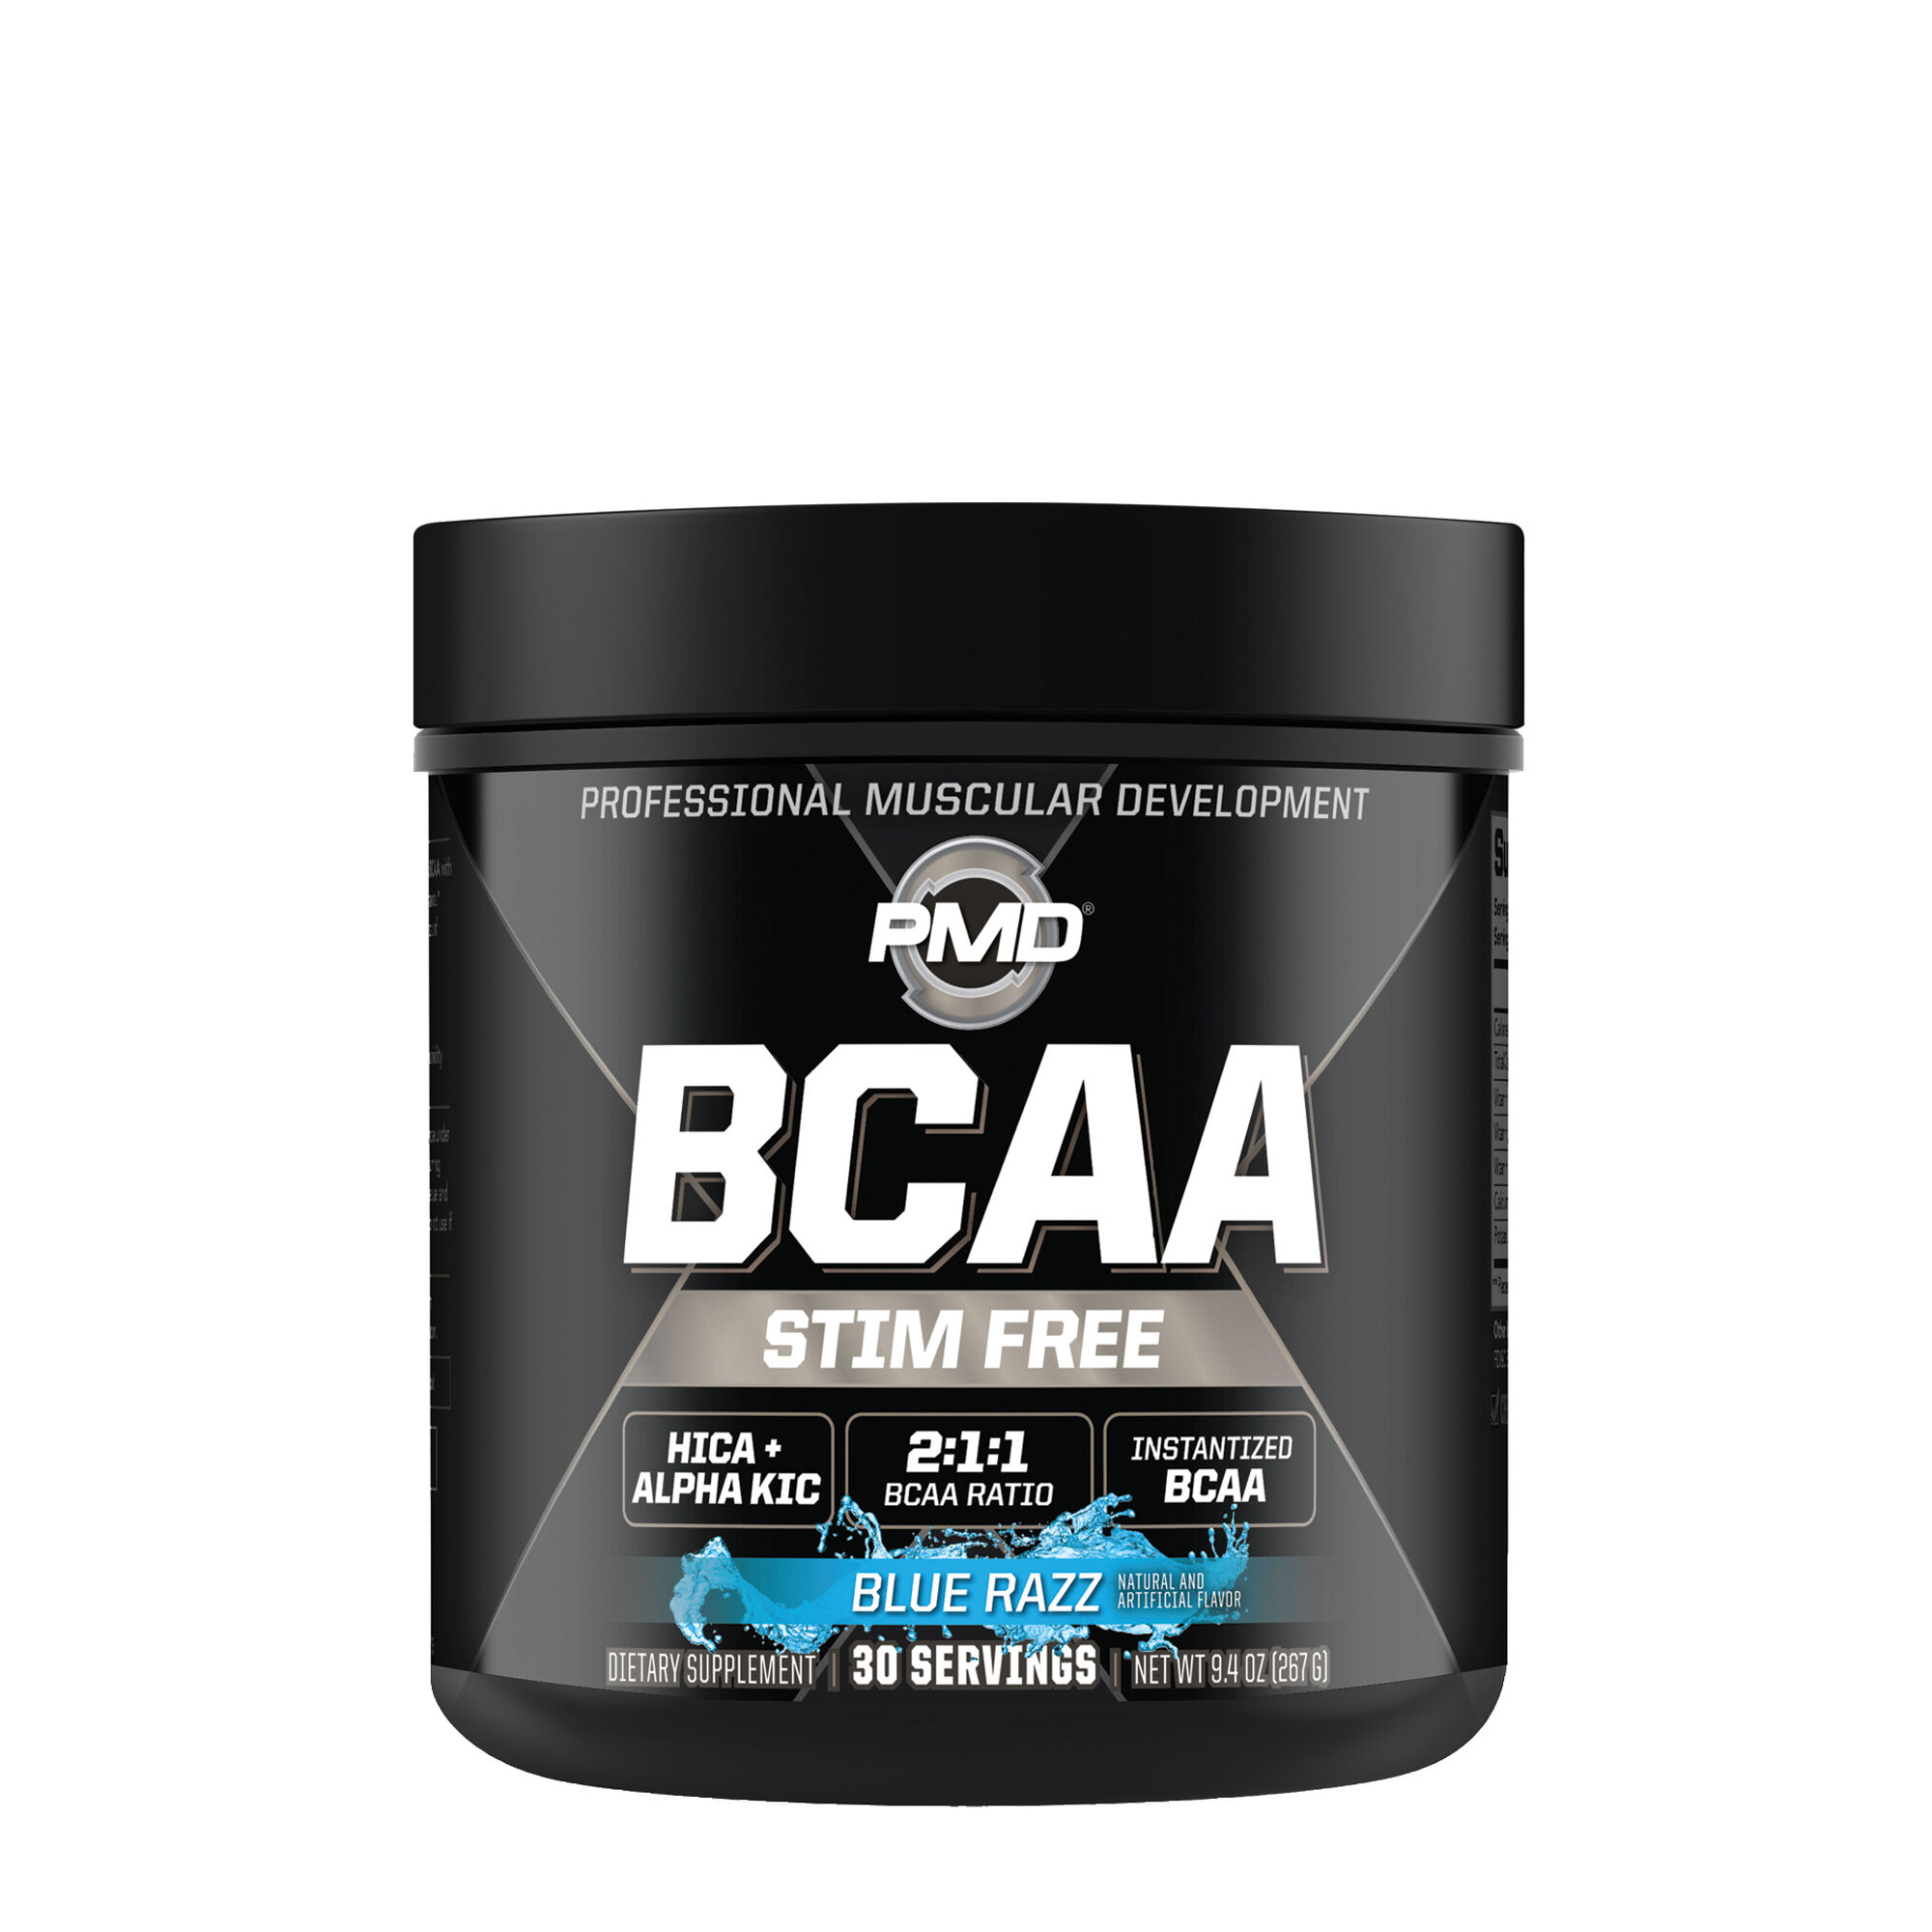 Value Acg3 pre workout gnc for Workout at Gym